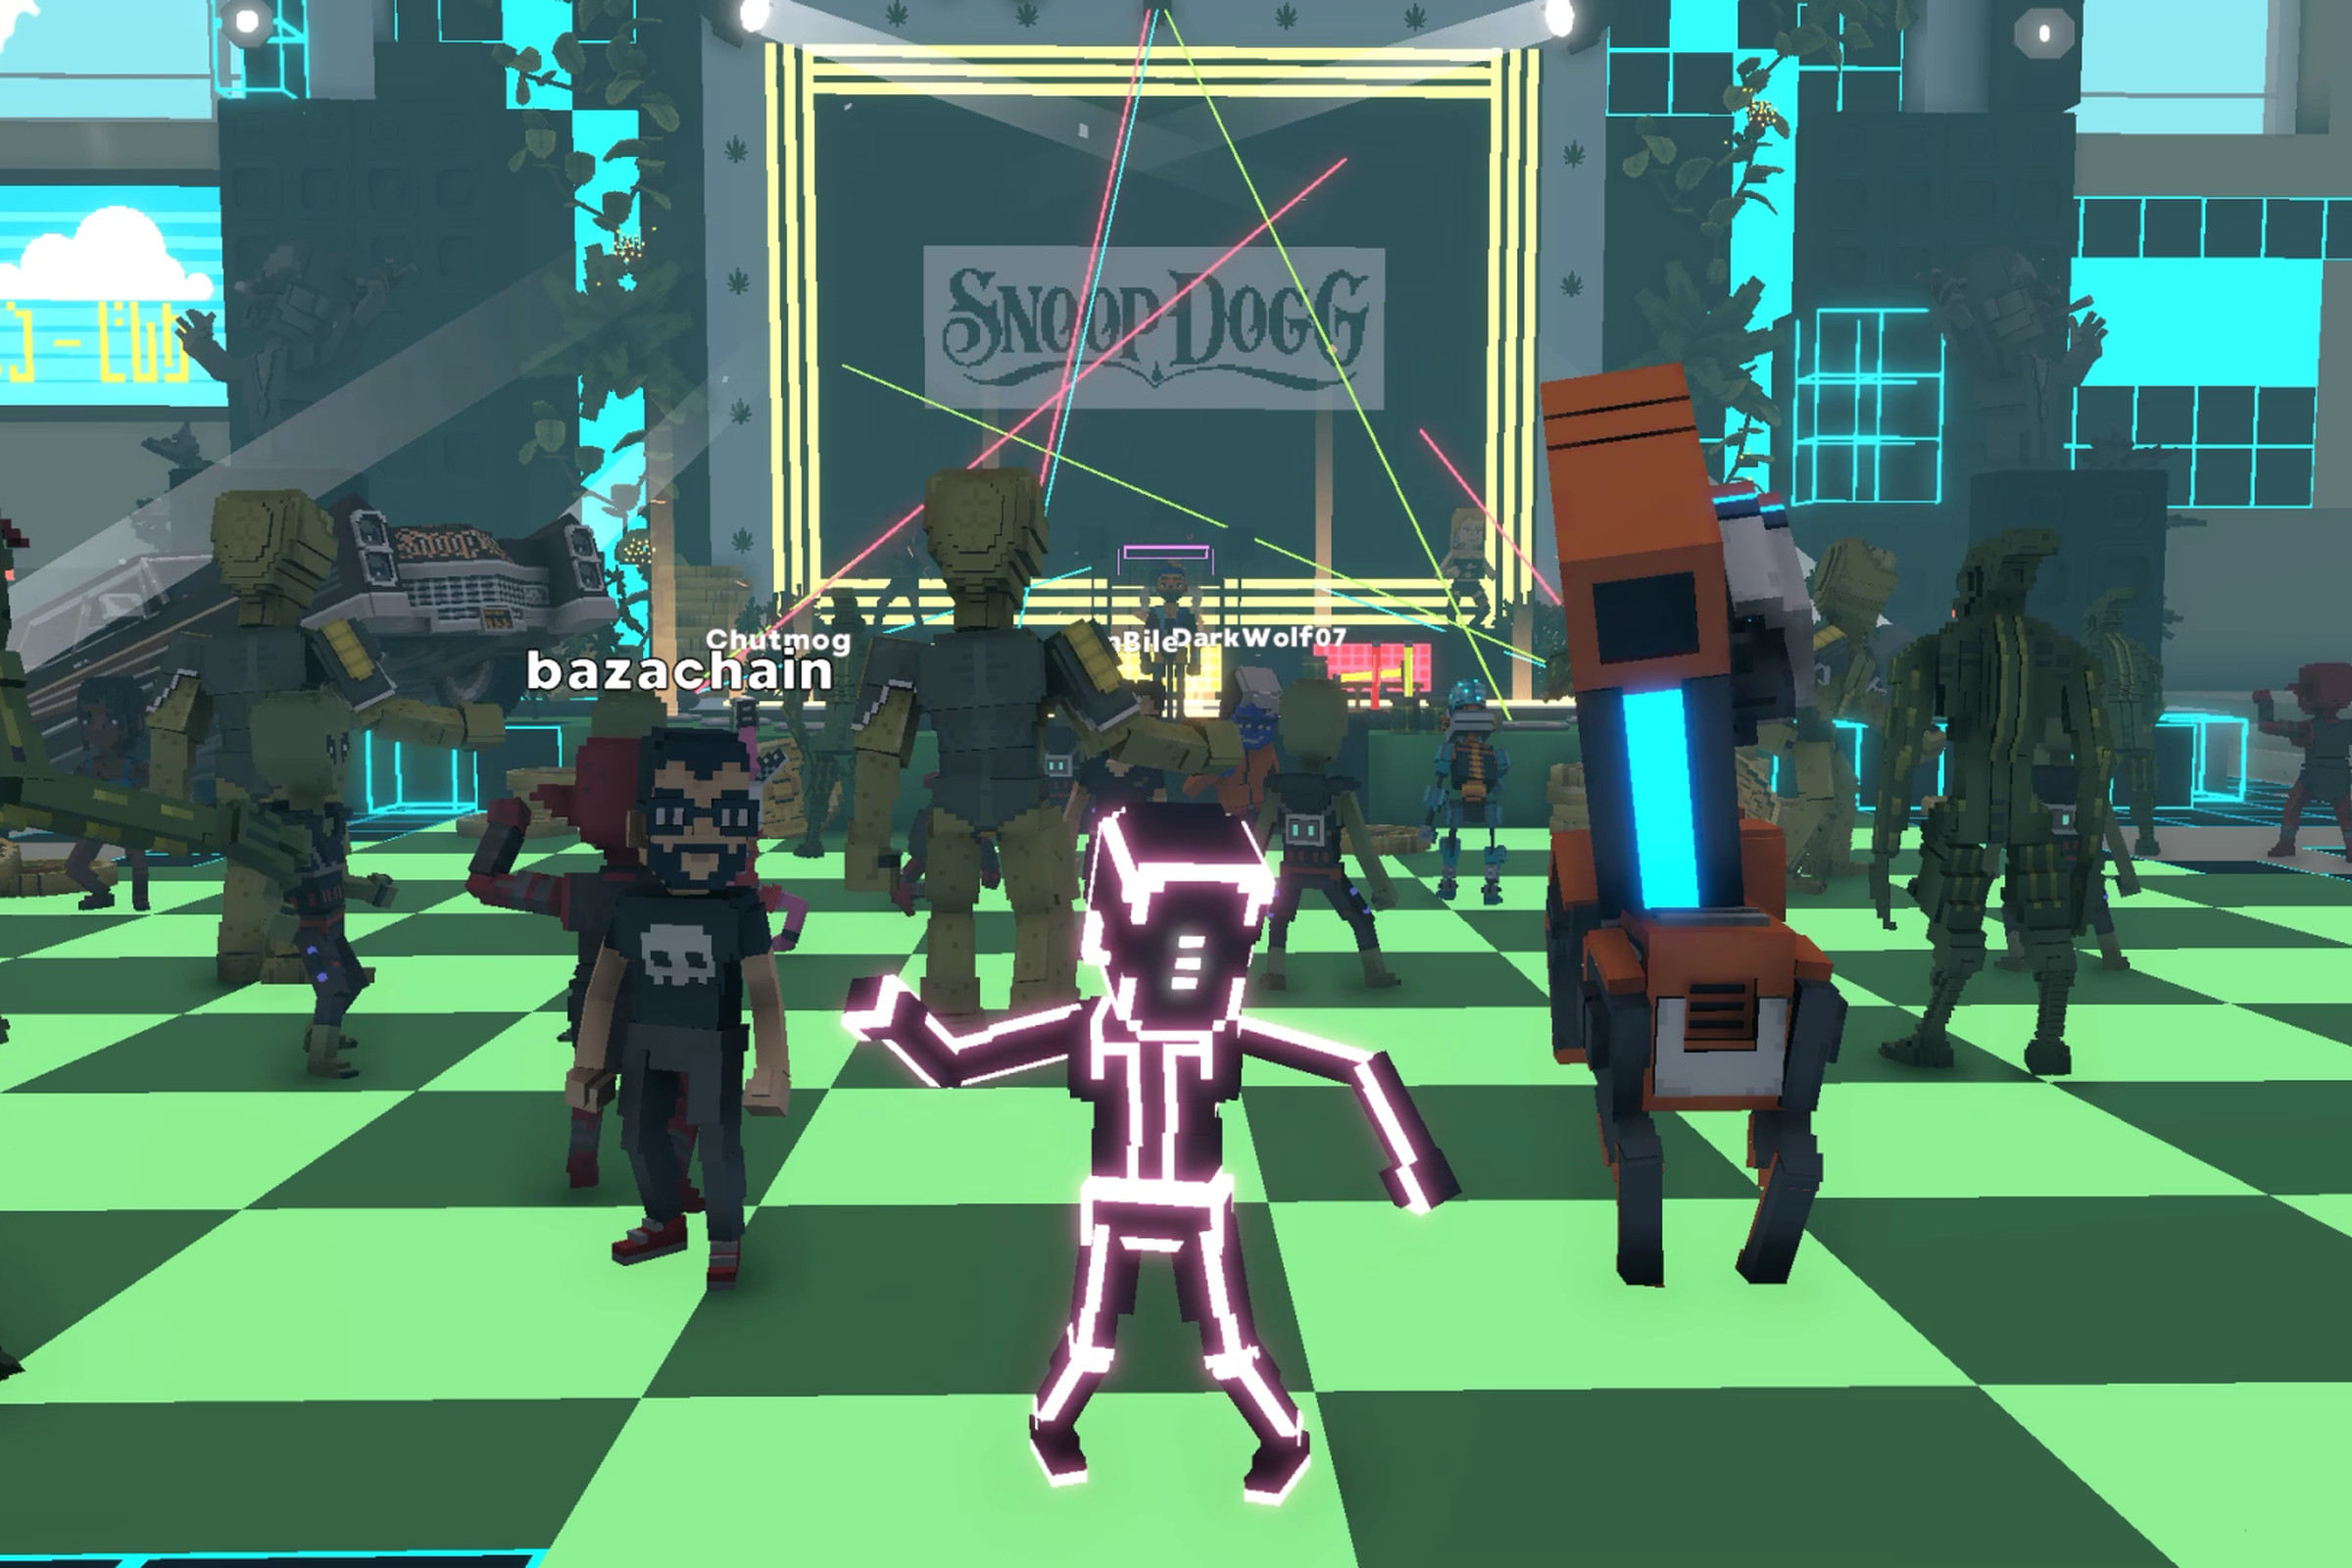 A virtual concert hall with blocky avatars dancing in front of a Snoop Dogg sign.